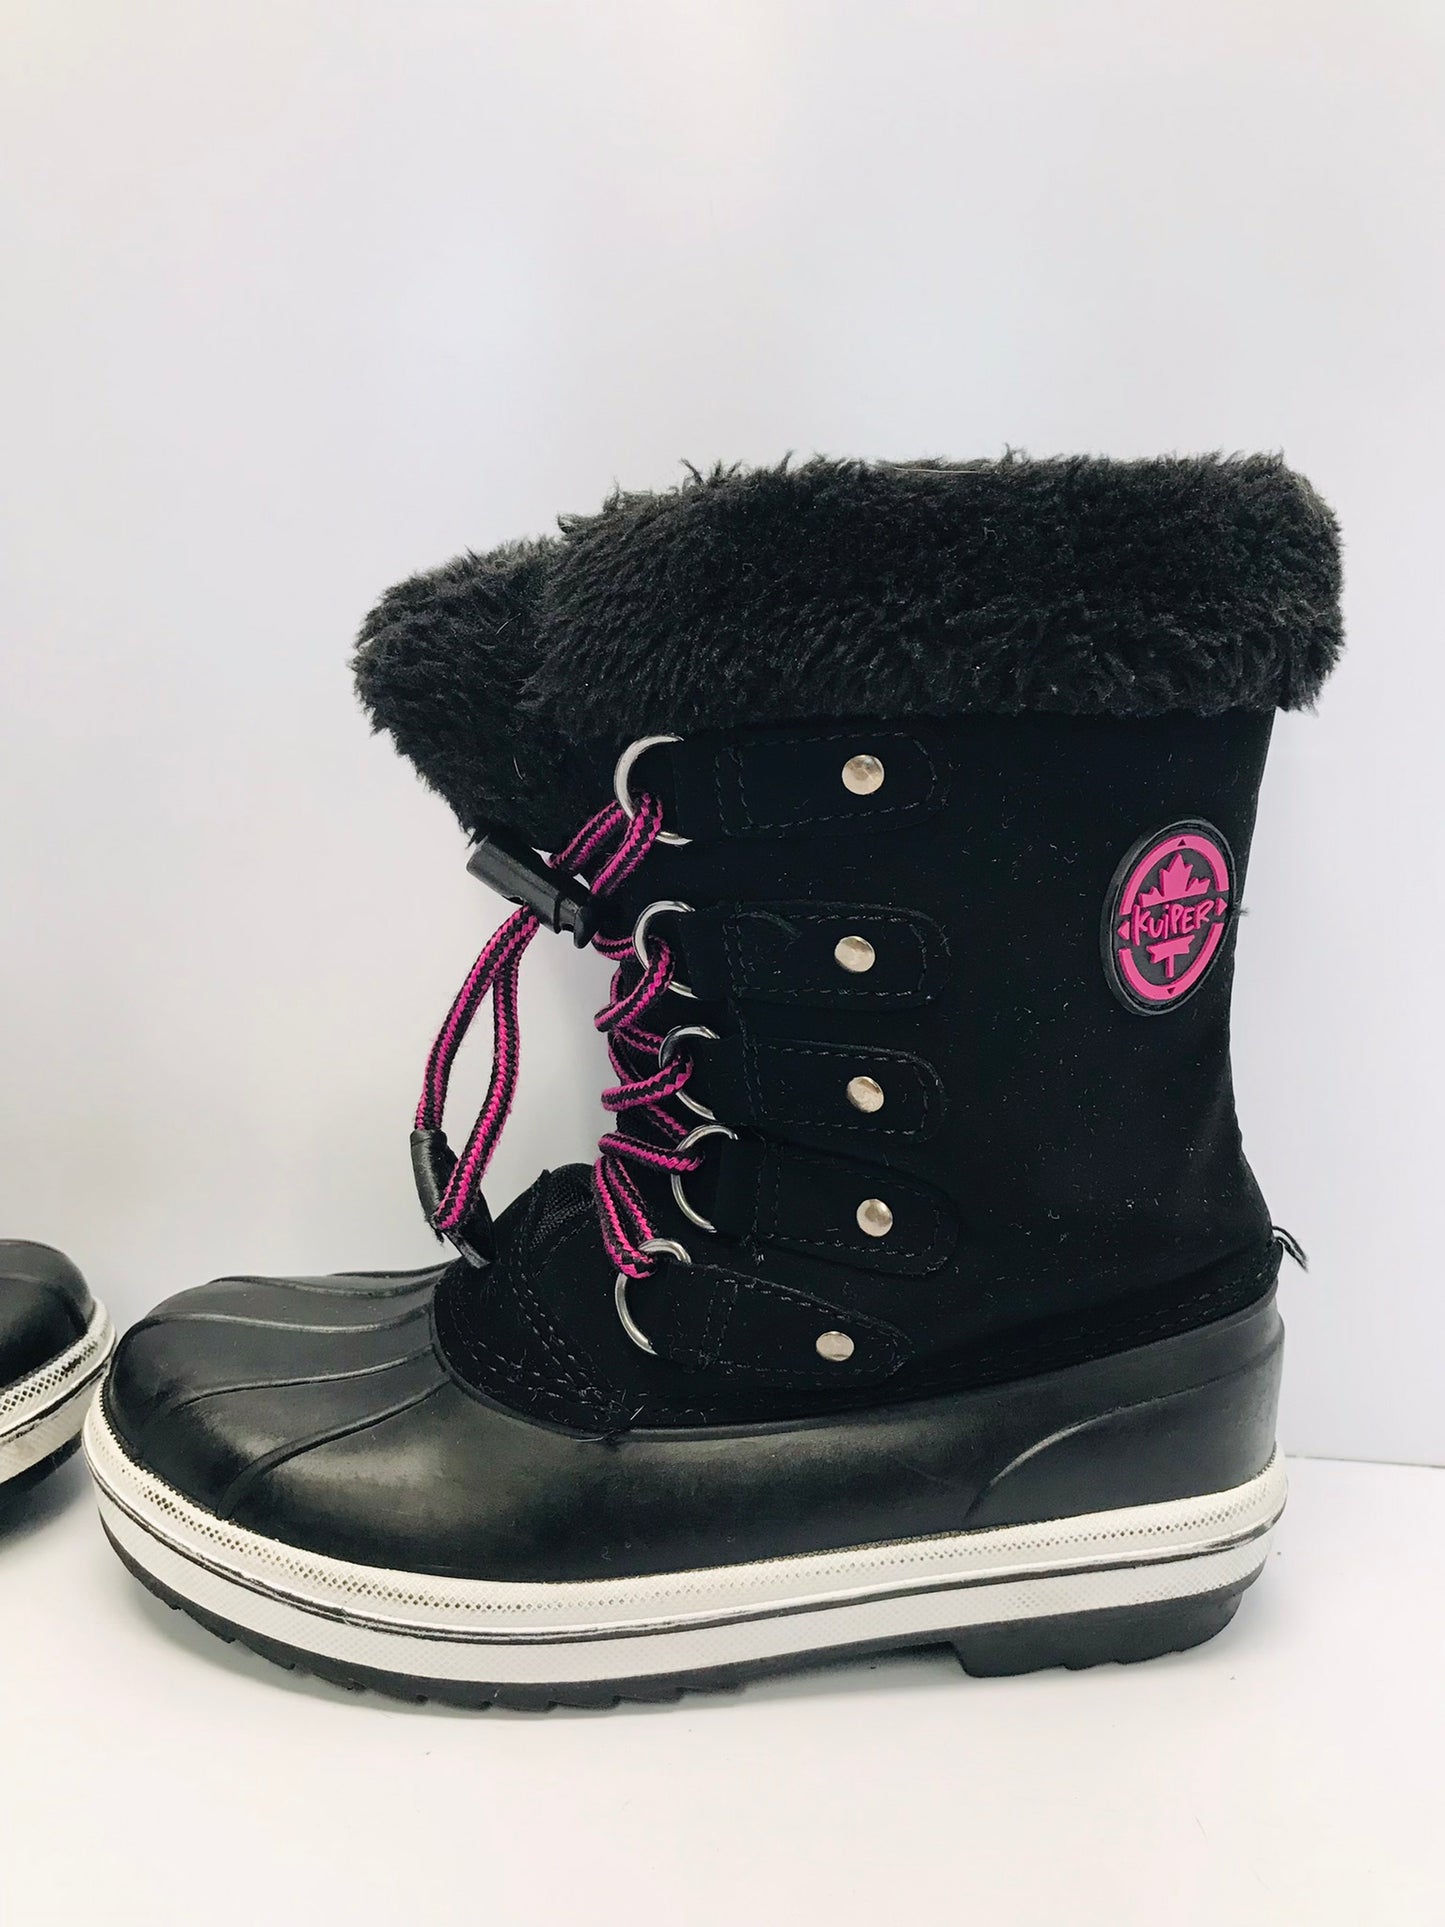 Winter Boots Child Size 1 Canadian Black and Fushia Excellent